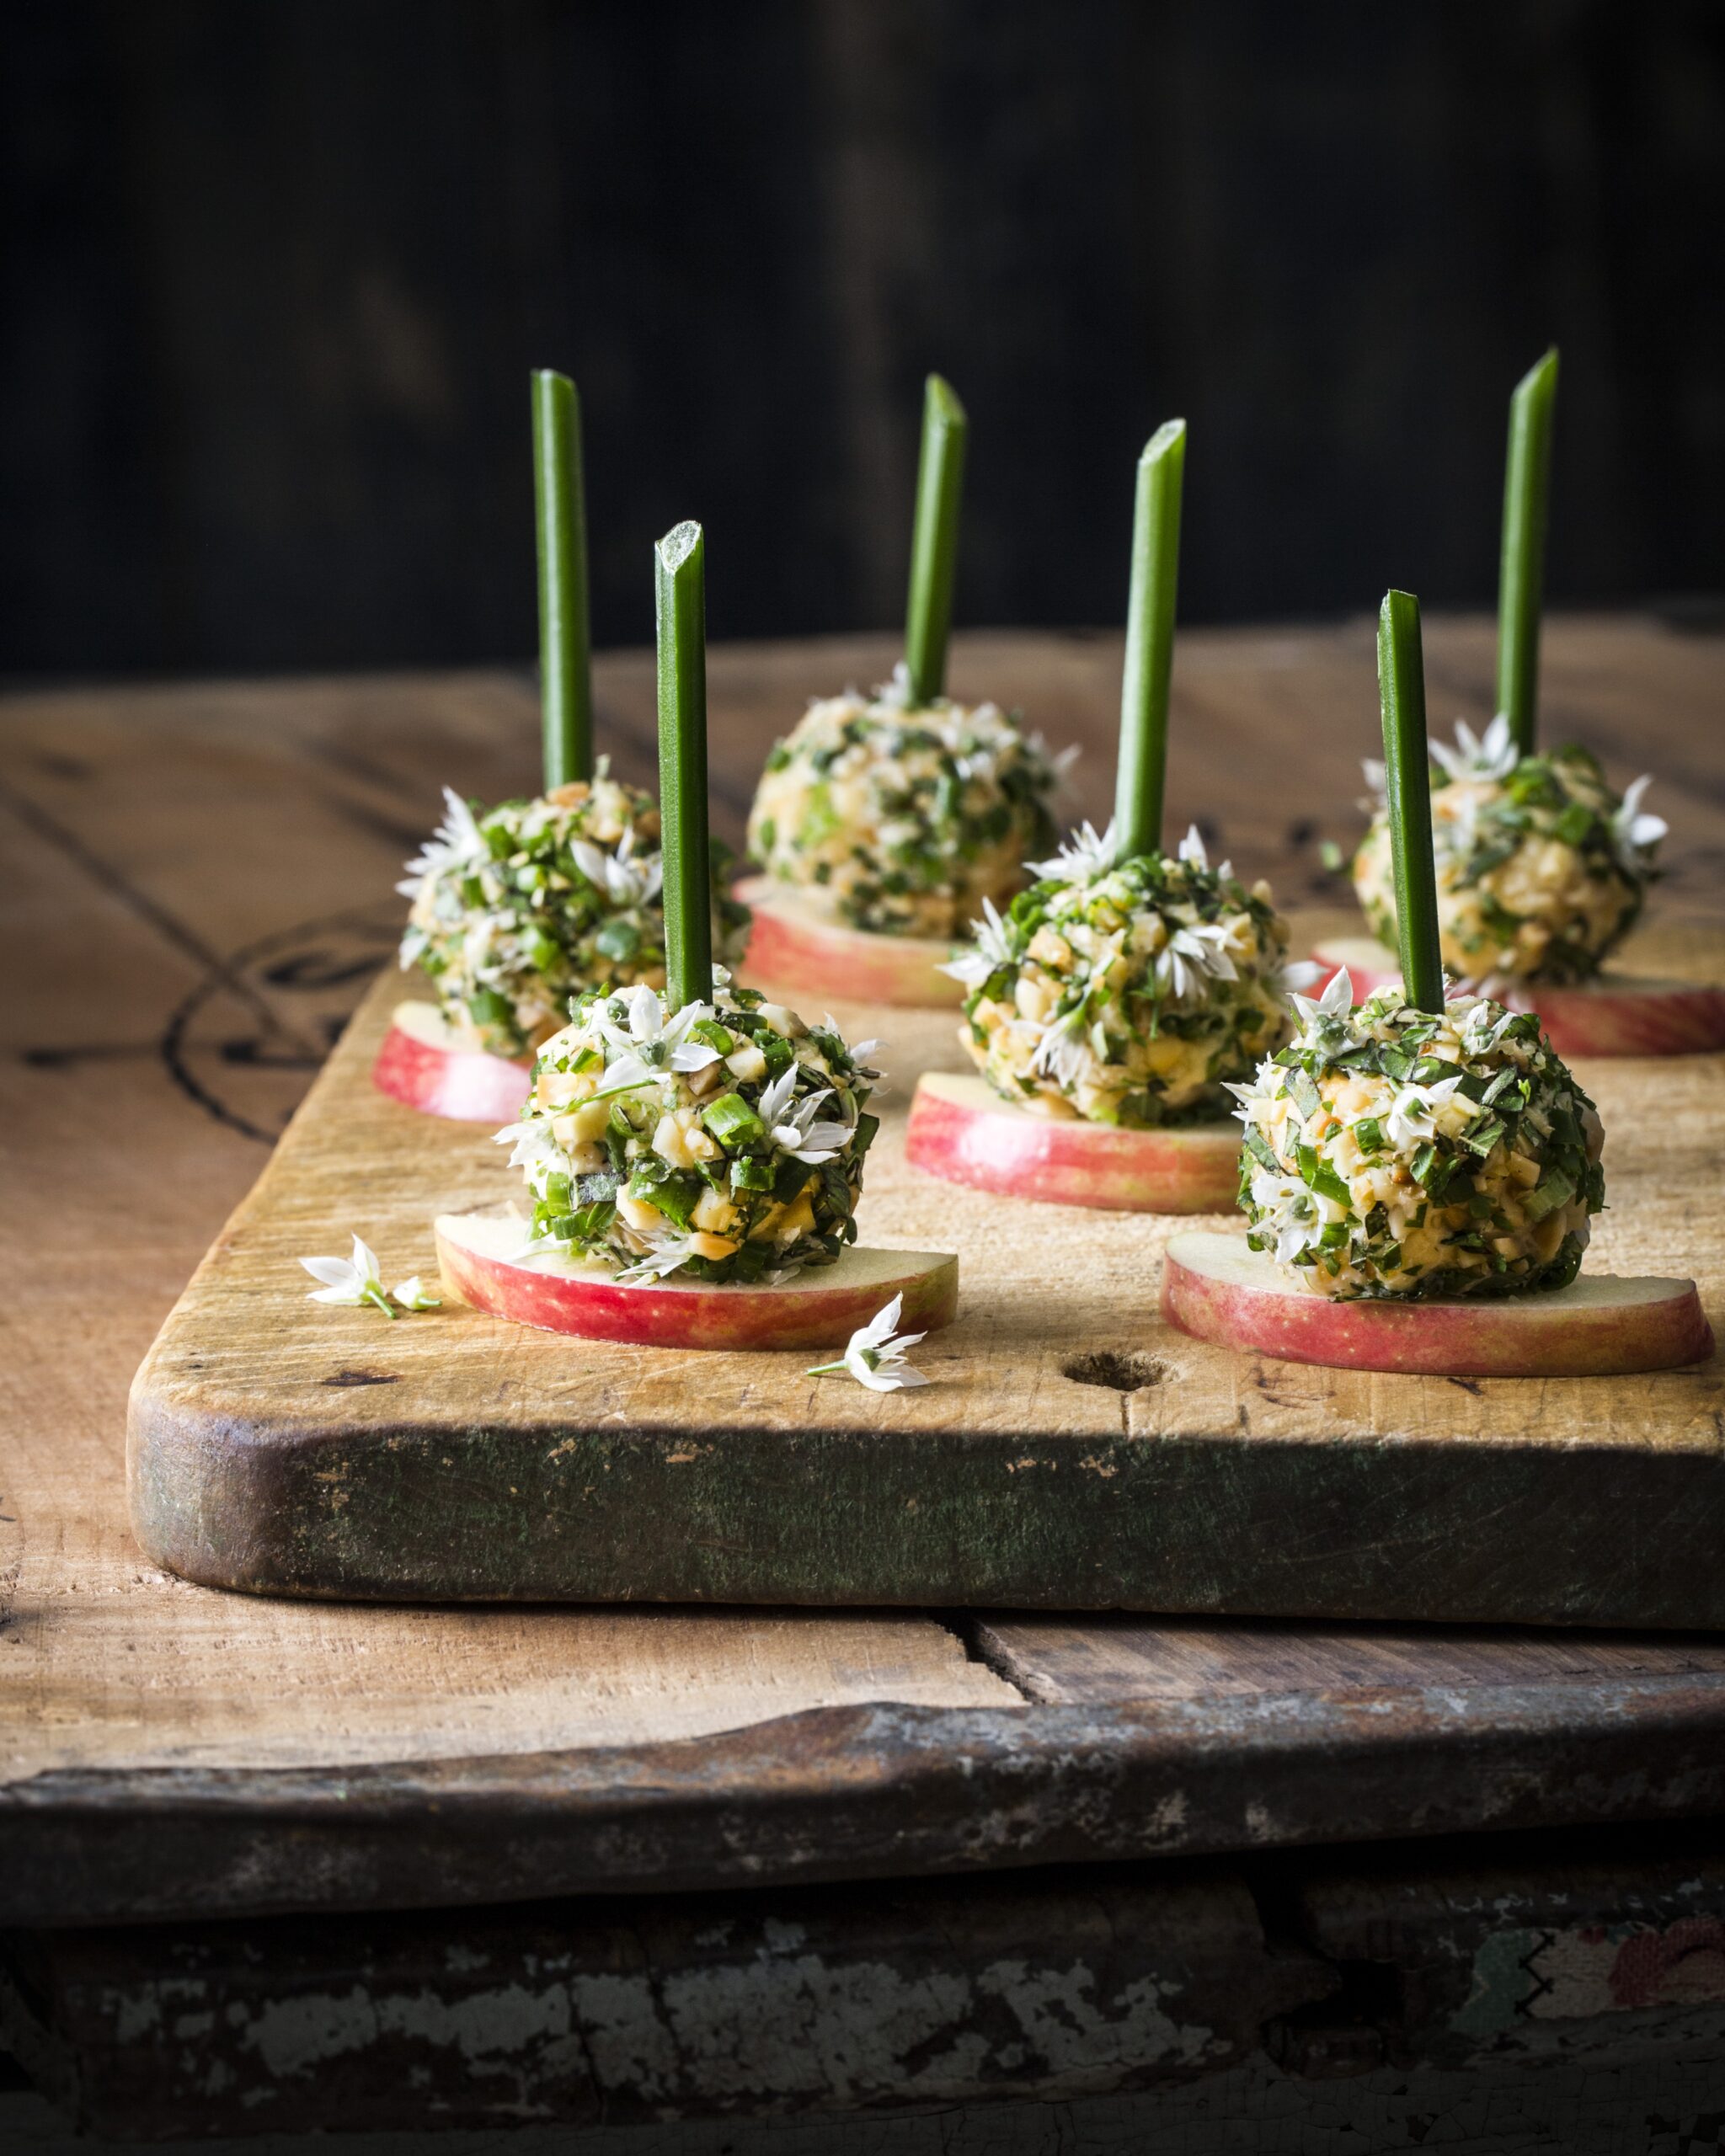 Mini Chive Blossom Cheese Balls With Chive Picks